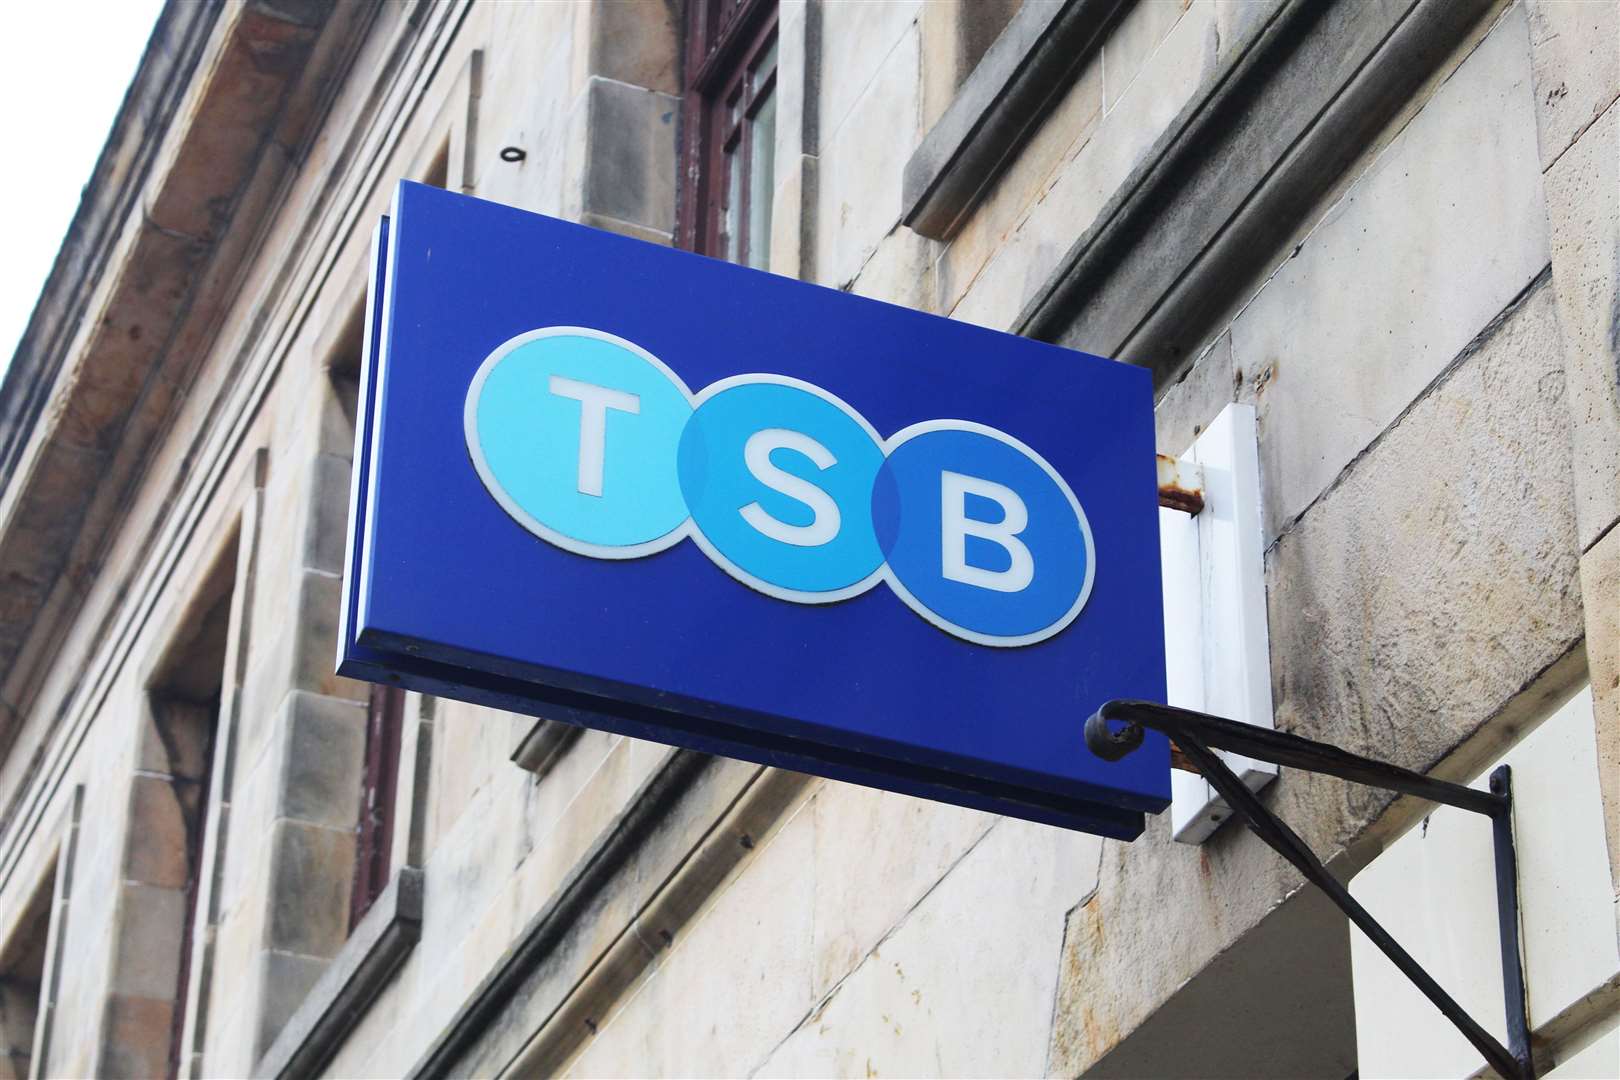 The Thurso closure in 2022 means there will no longer be a TSB branch in Caithness after the bank pulled out of Wick earlier this year.